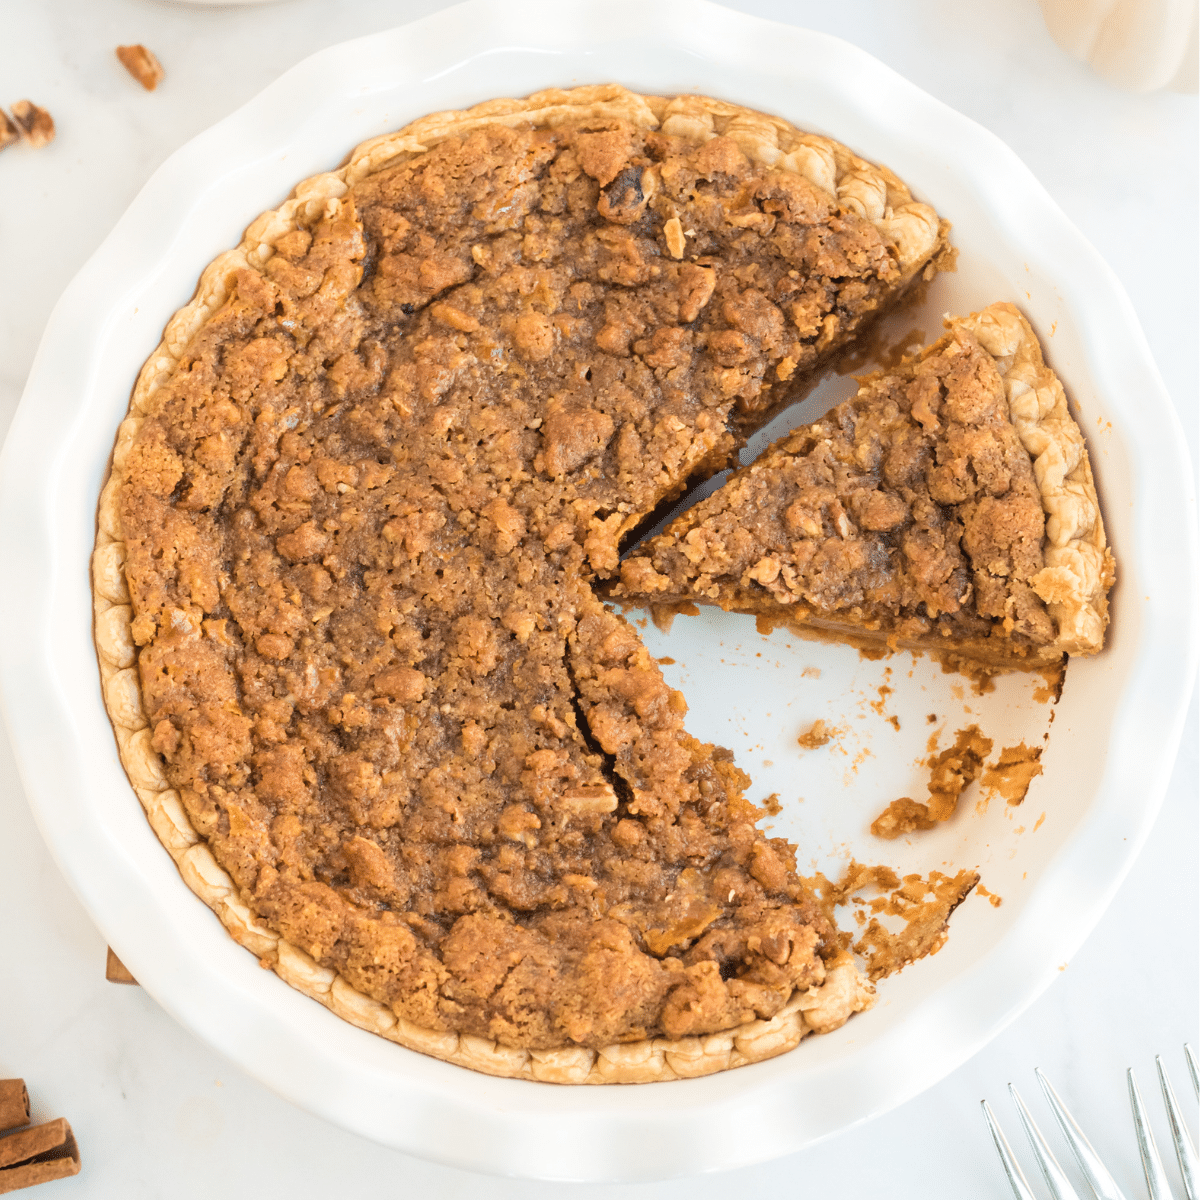 pumpkin pie with a pecan streusel topping